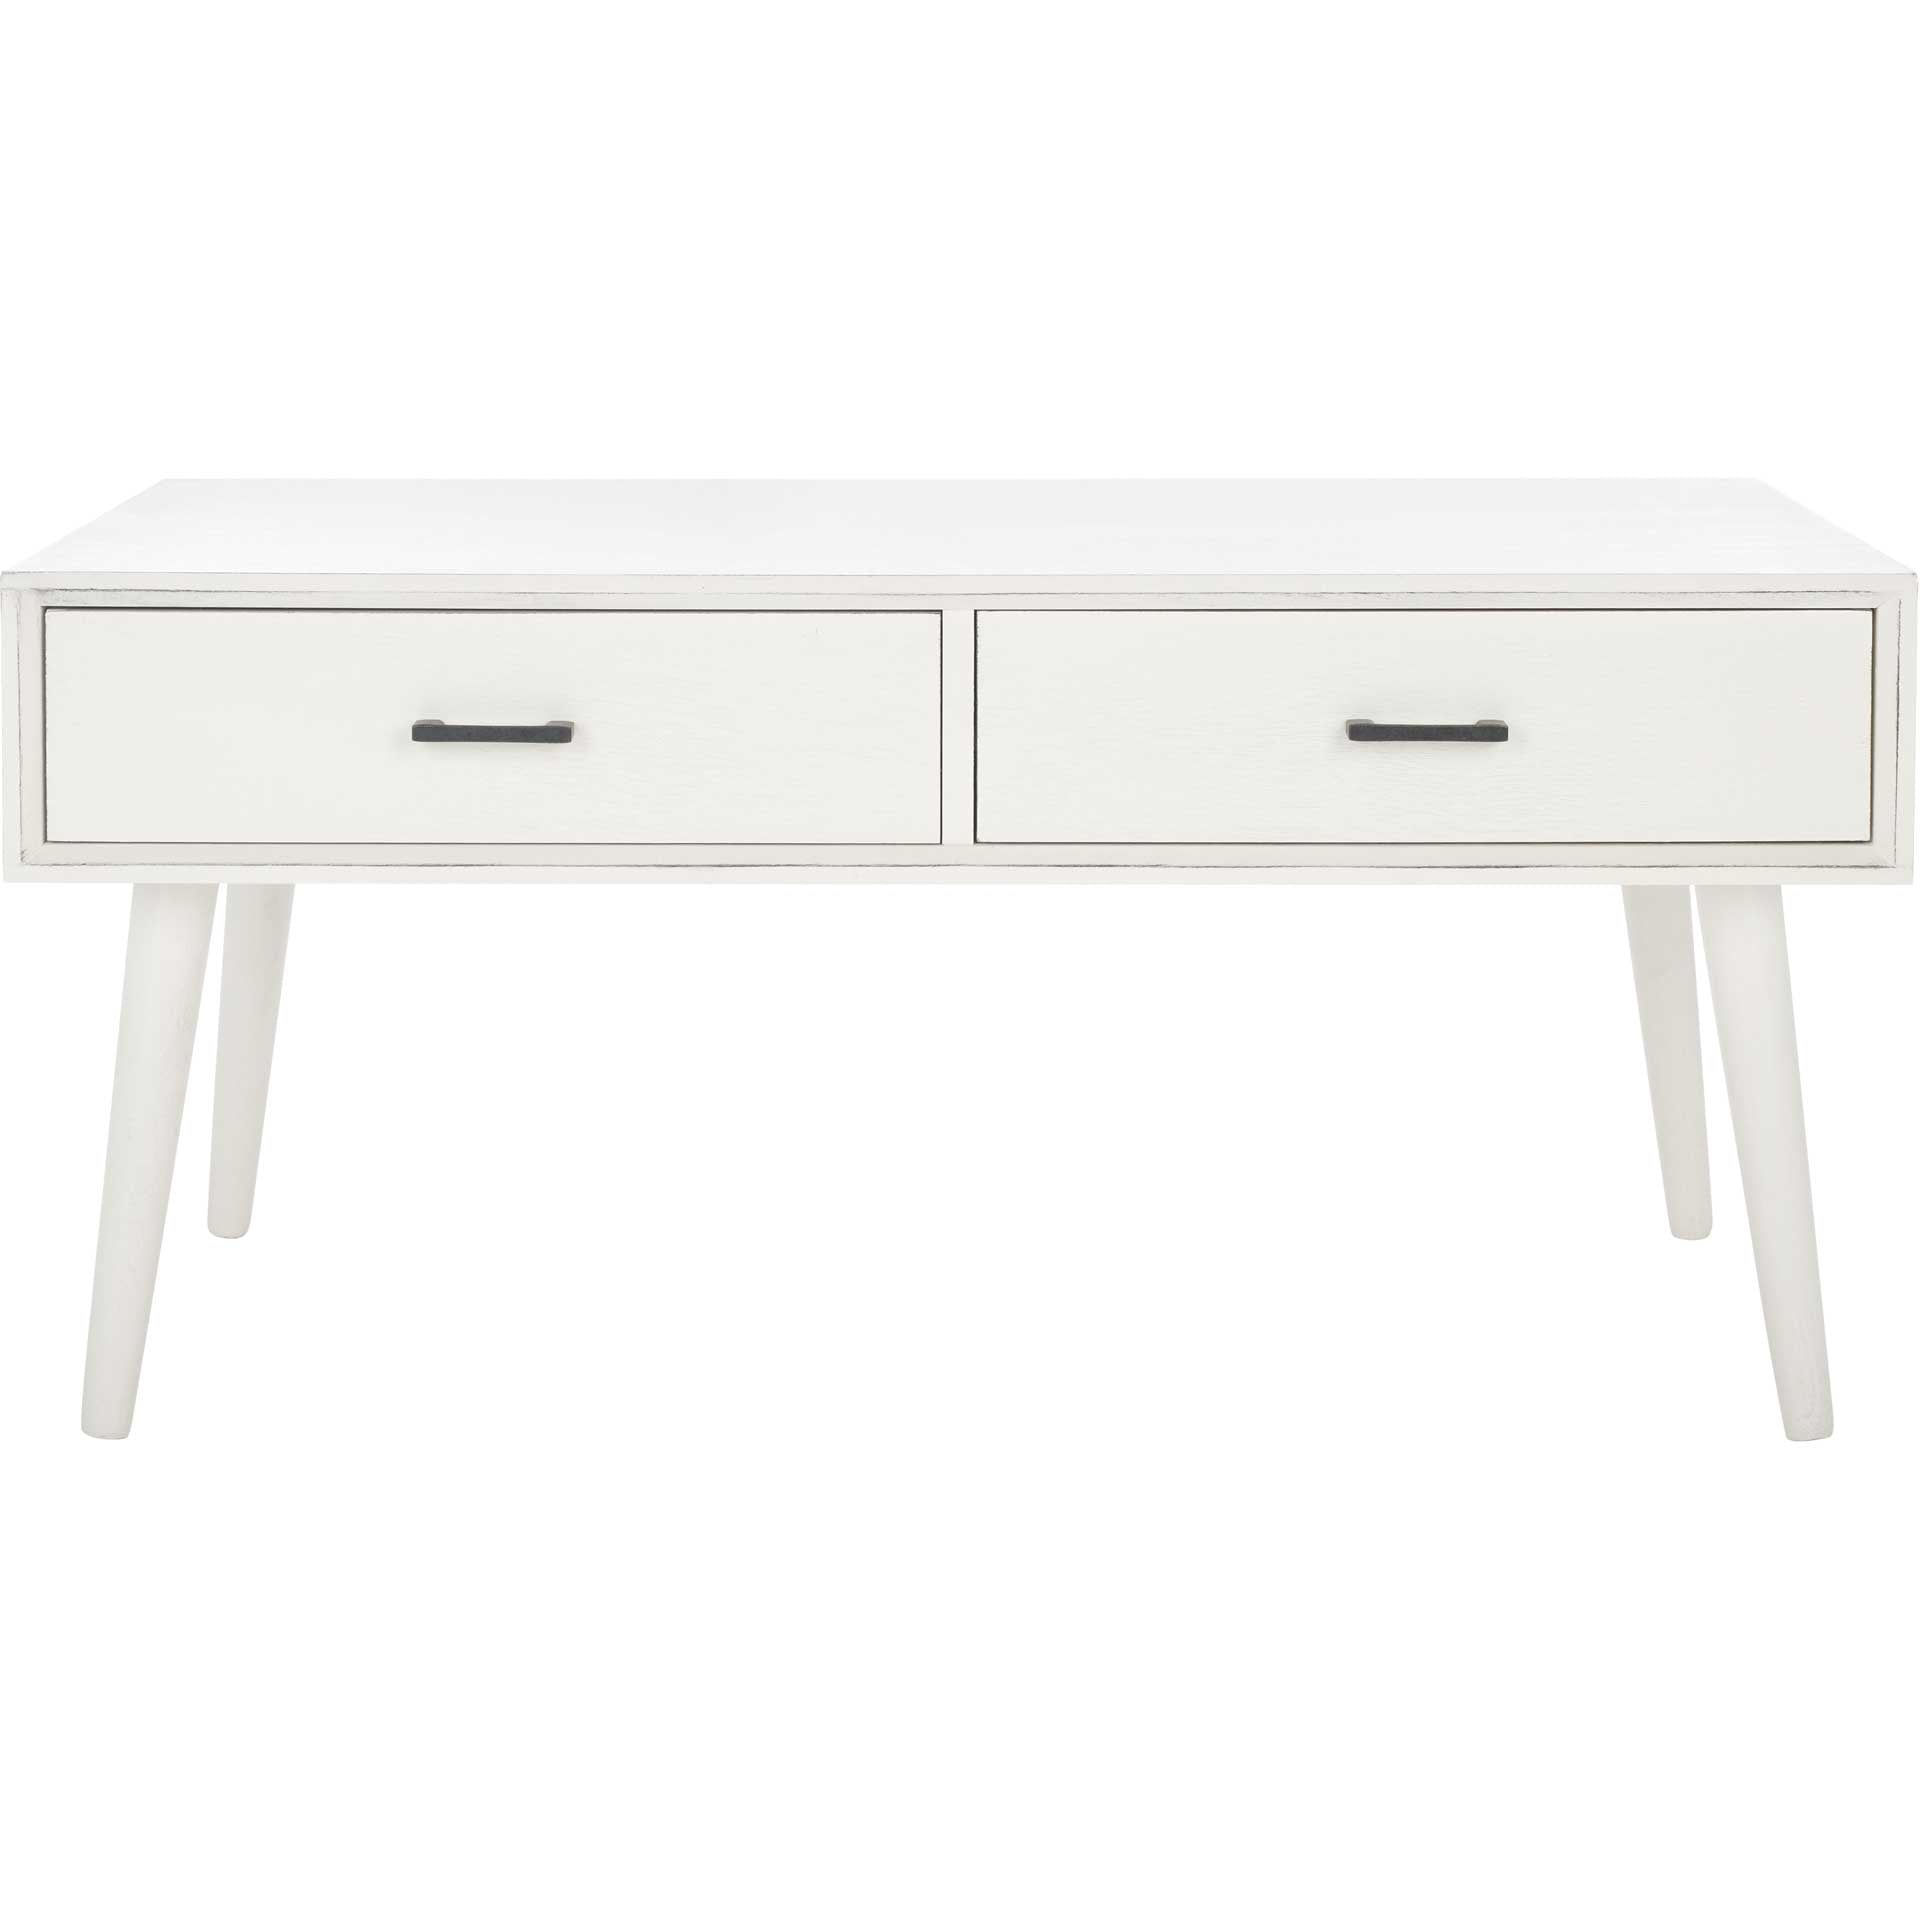 Morris 2 Drawer Coffee Table Distressed White